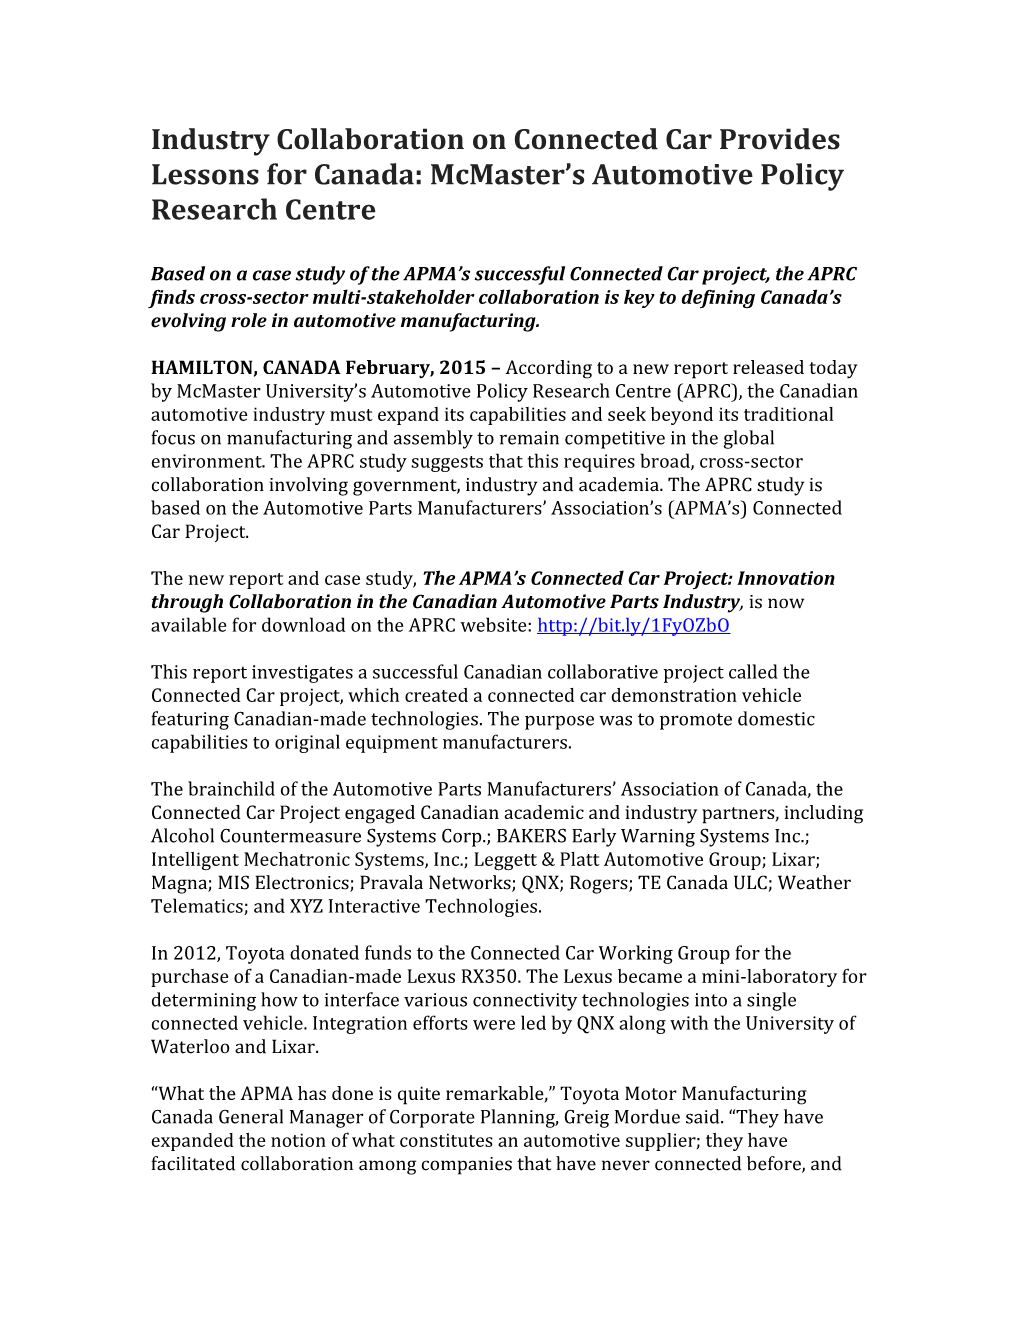 Industry Collaboration on Connected Car Provides Lessons for Canada: Mcmaster S Automotive